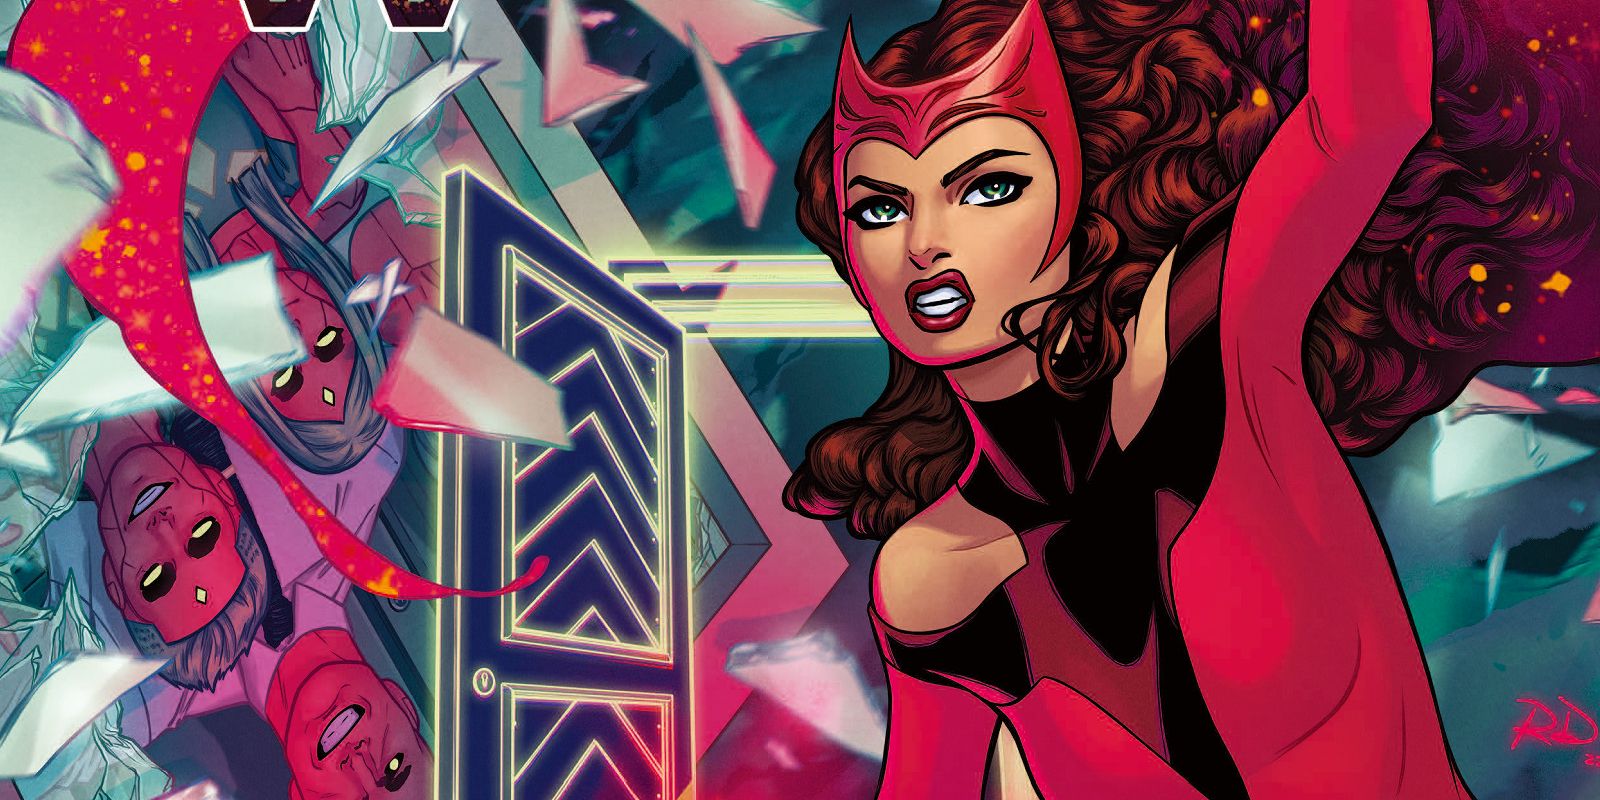 The Scarlet Witch faces memories of an android family in Marvel Comics